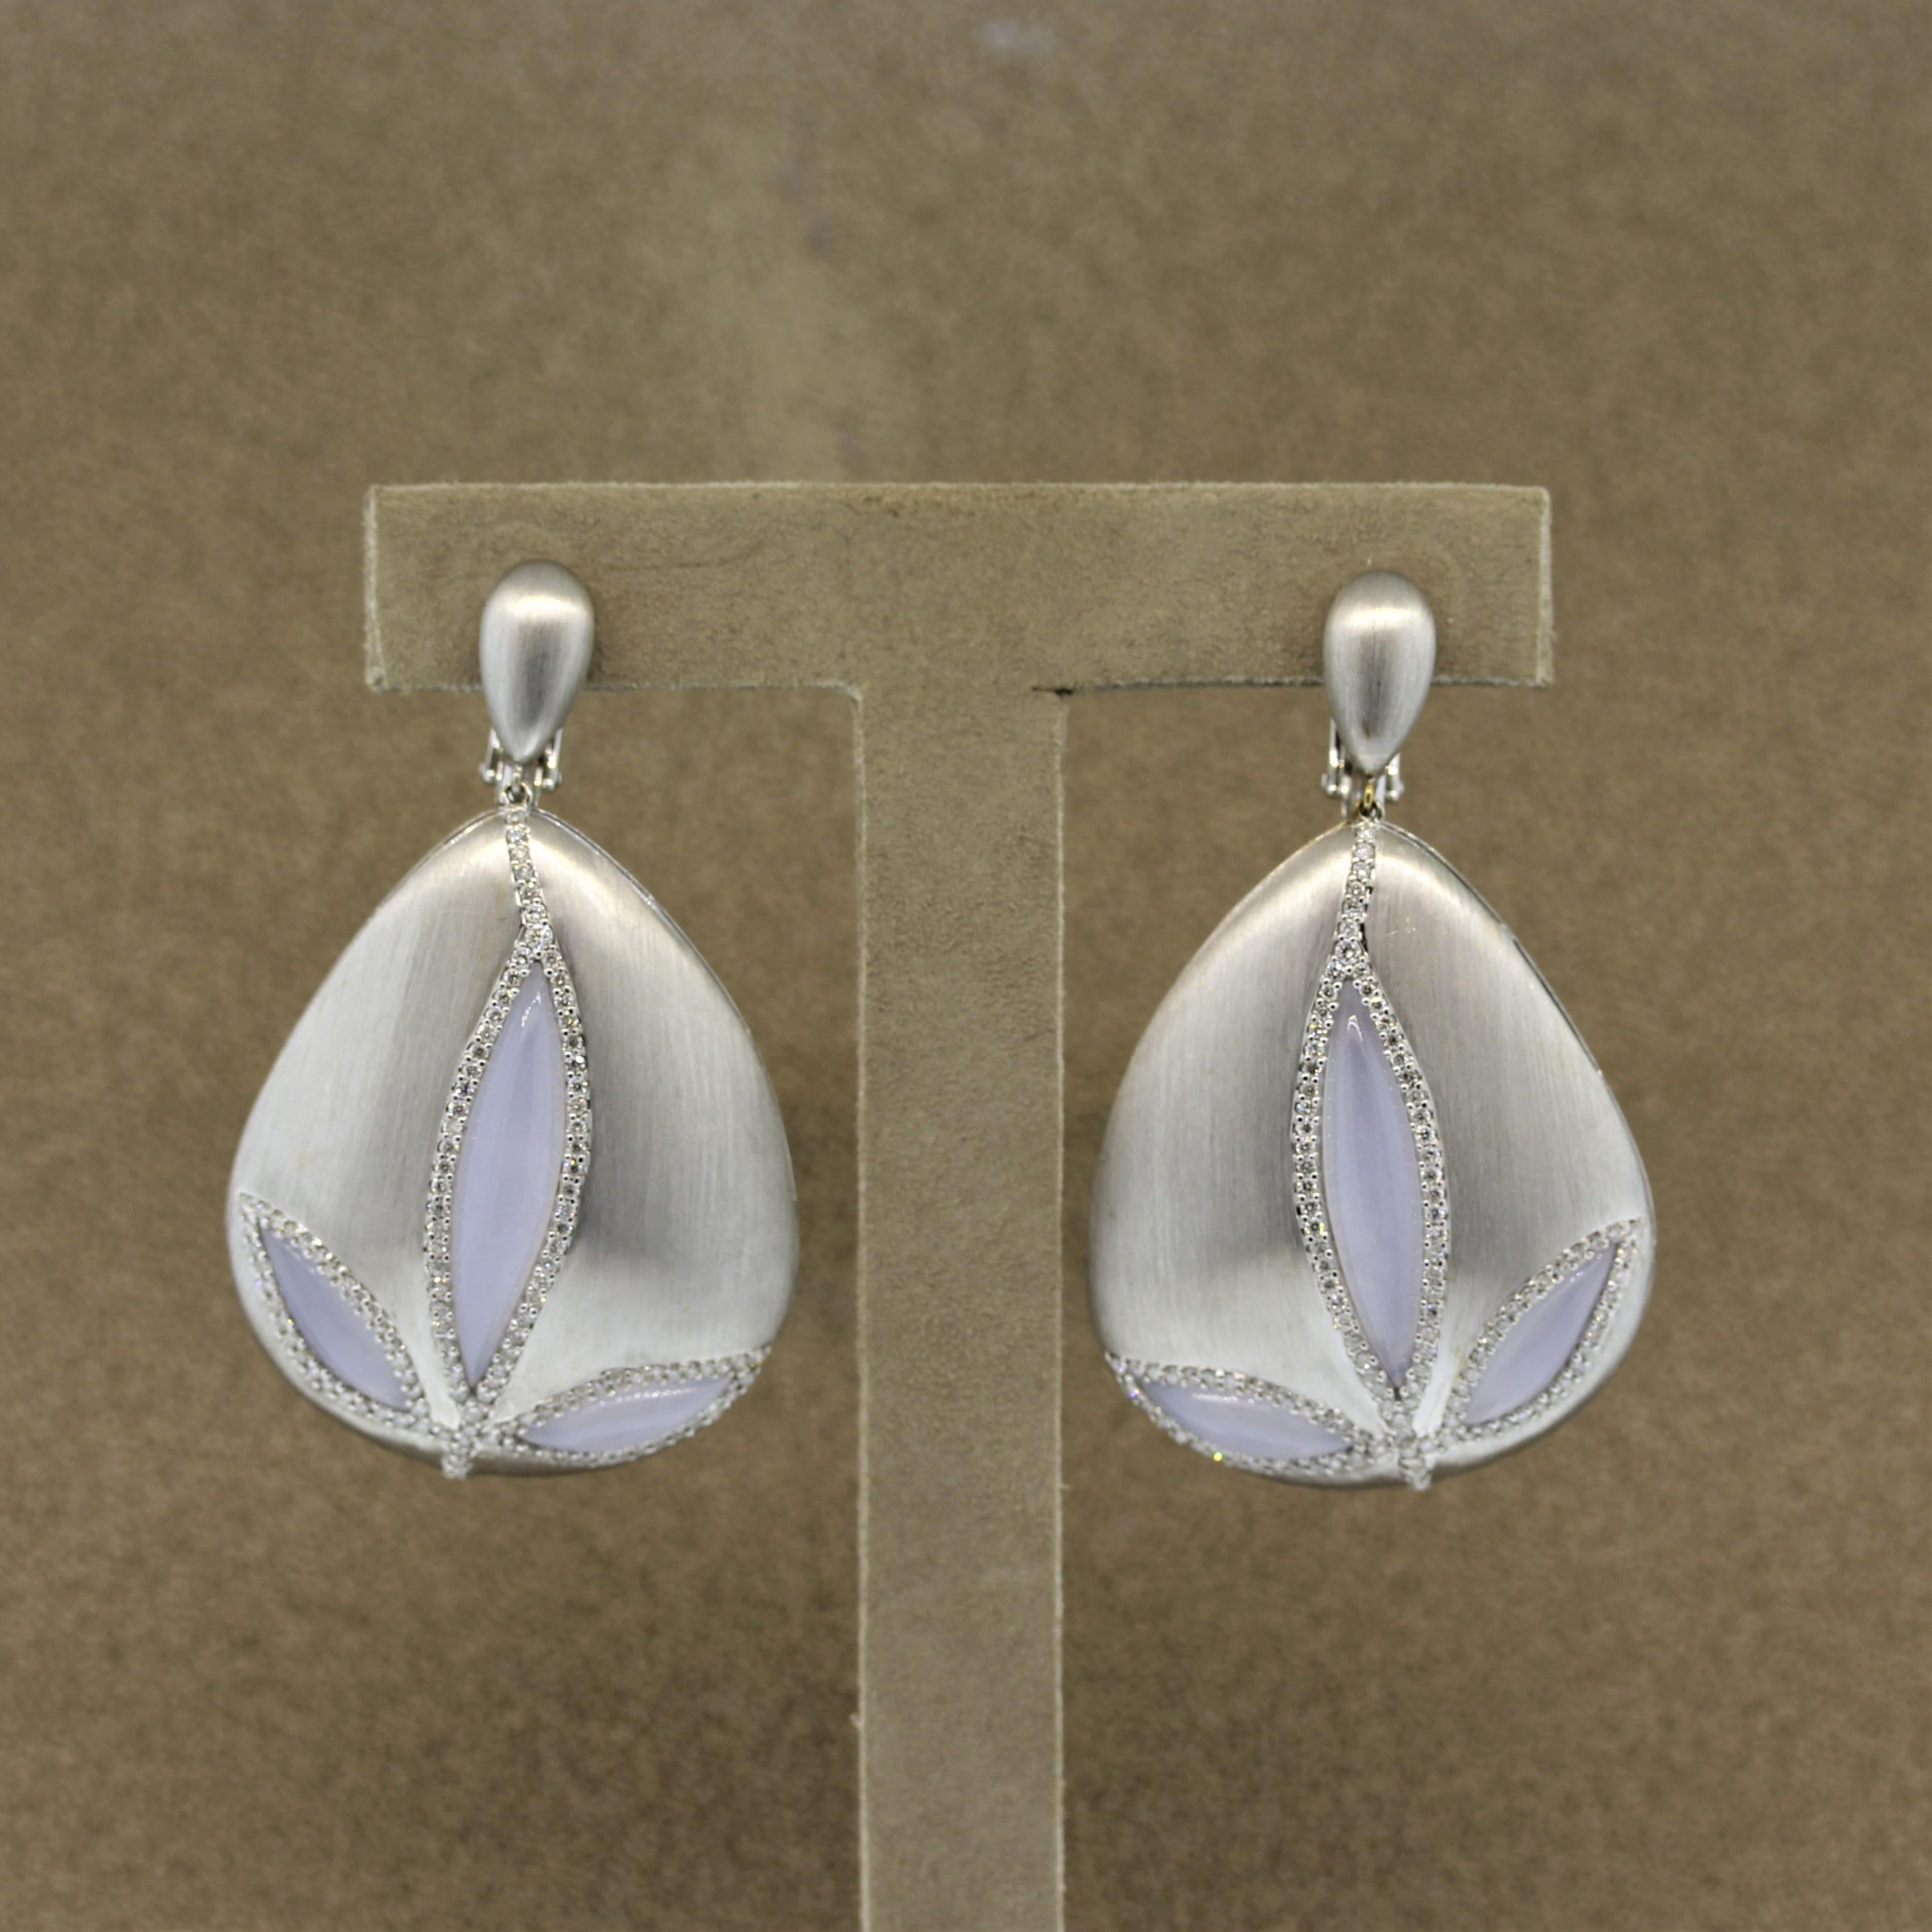 A sweet pair of earrings designed to resemble a flower. They feature 6 pieces of hand carved moonstone weighing a total of 9.46 carats, which are haloed by 1.86 carats of round brilliant cut diamonds. The earrings are made in 18k white gold which